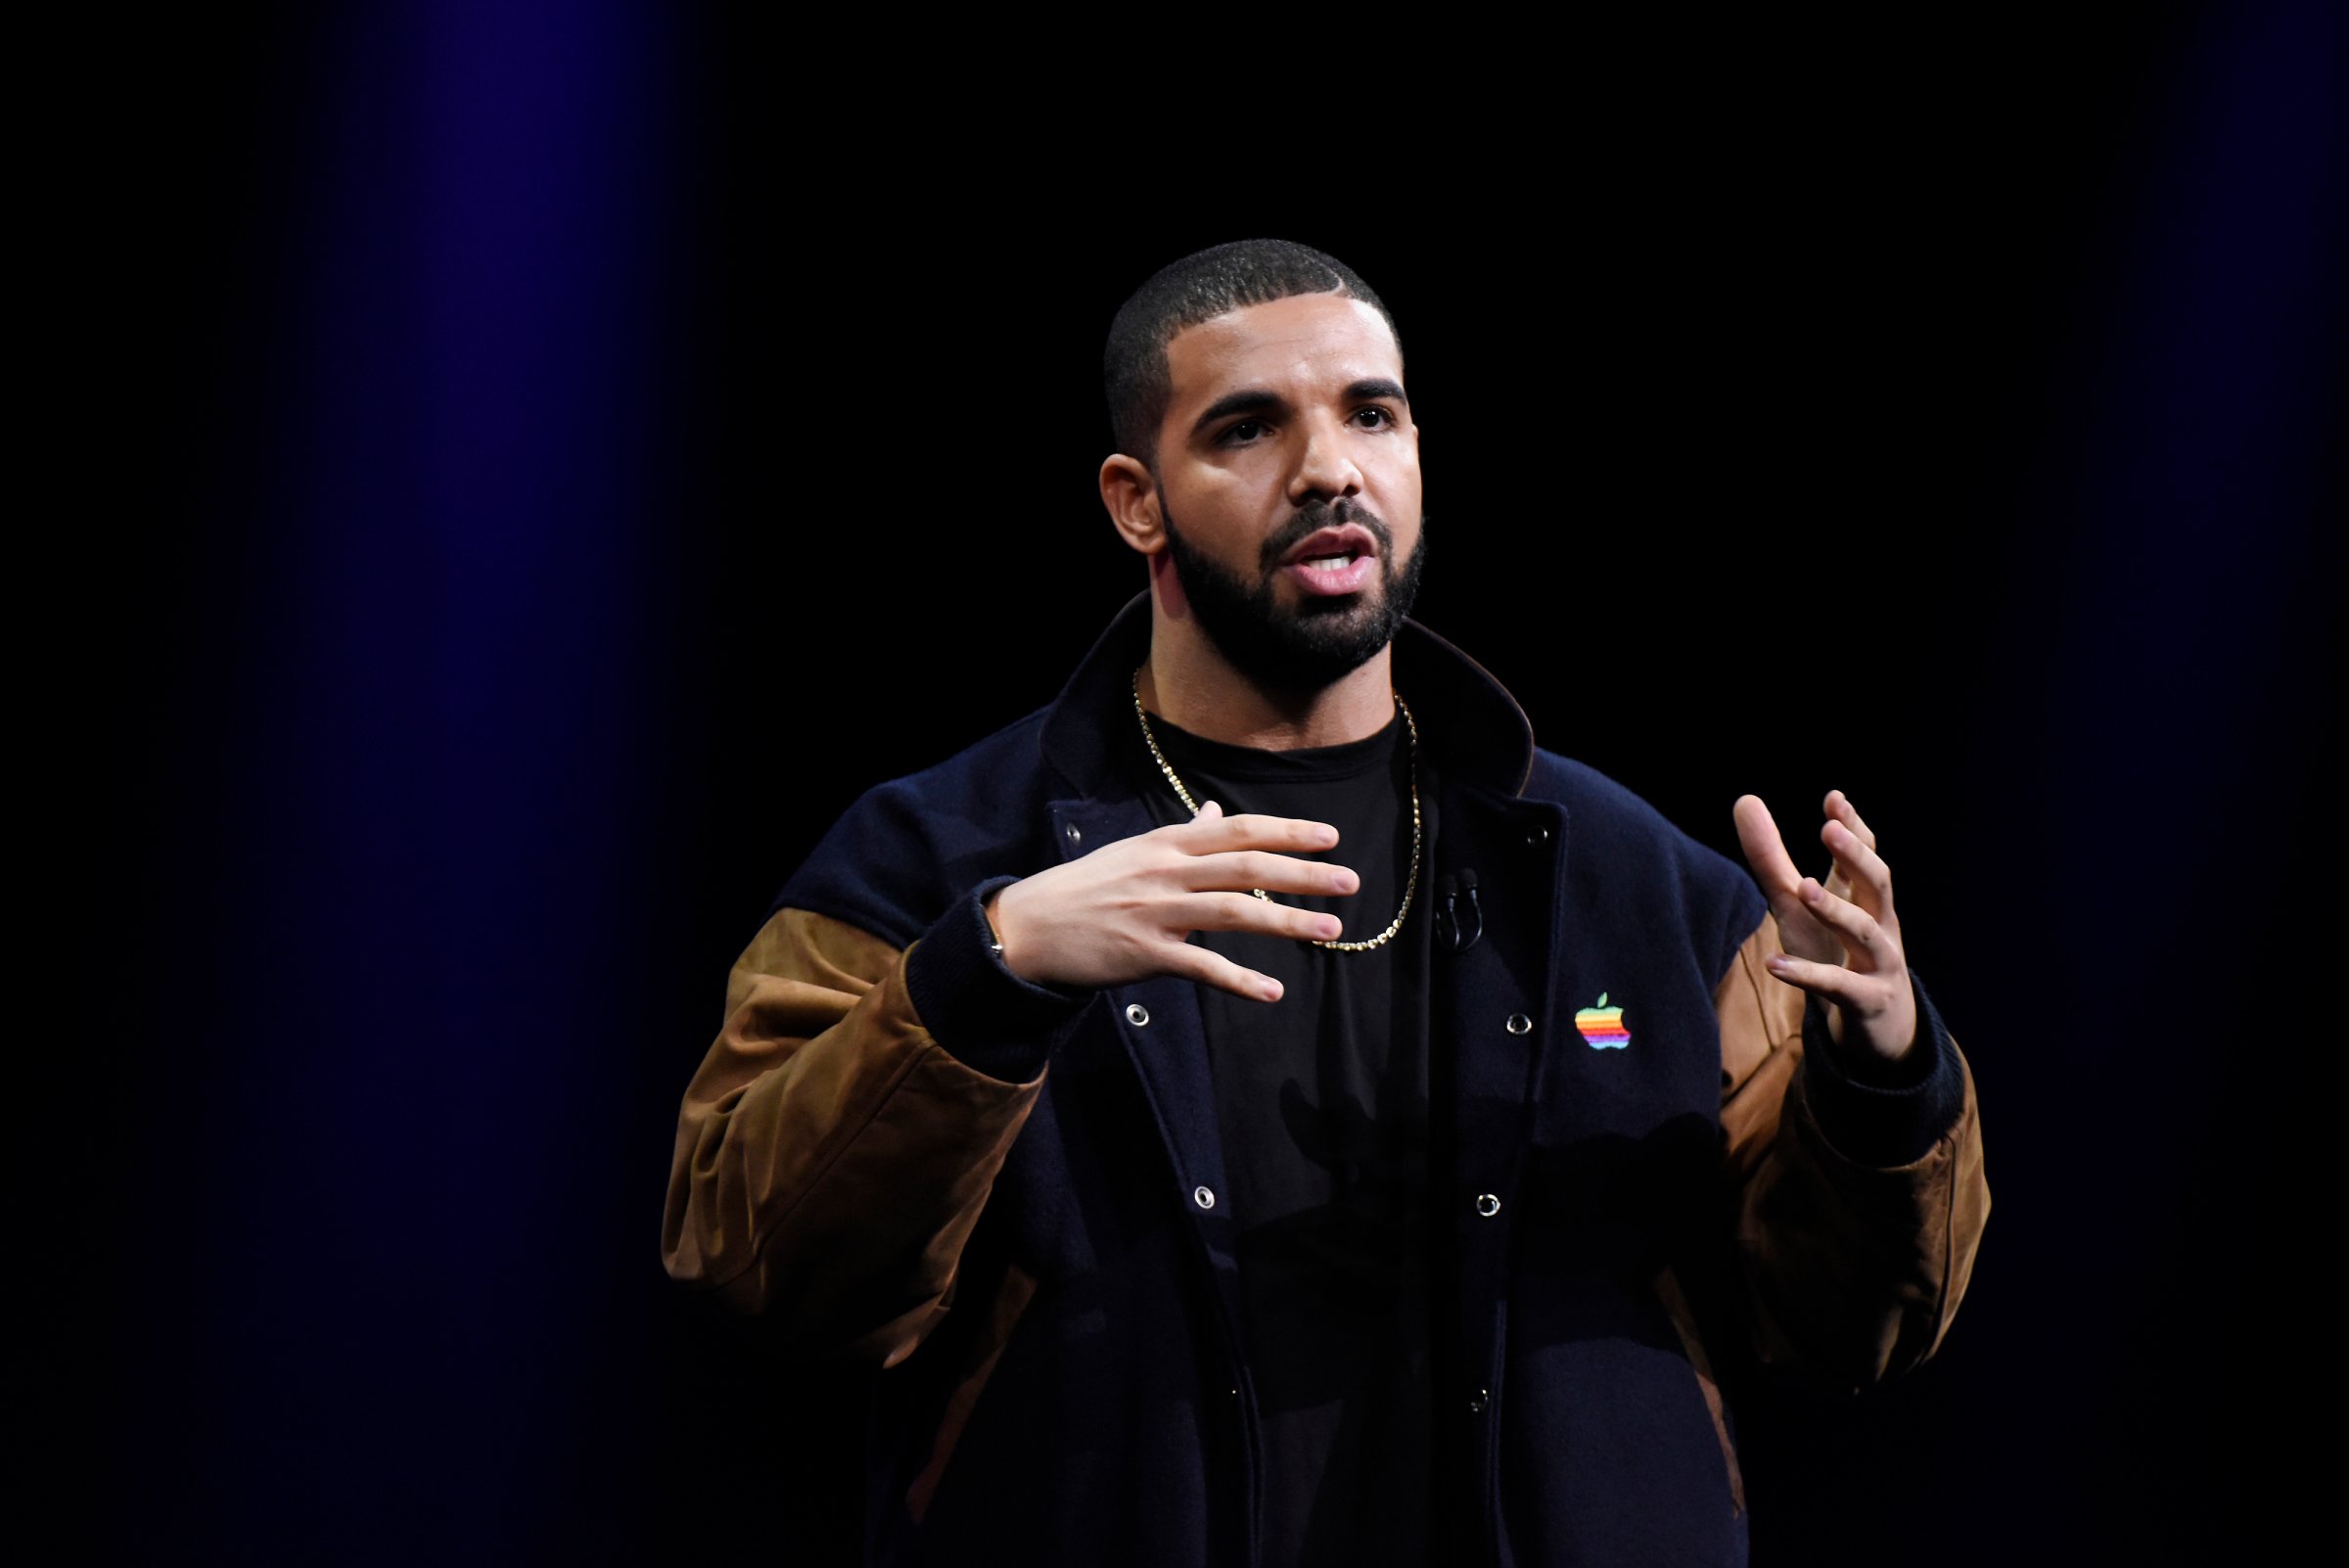 Entertainer Aubrey Drake Graham known as Drake speaks during the Apple World Wide Developers Conference (WWDC) in San Francisco, California, U.S., on Monday, June 8, 2015. Apple Inc., the maker of iPhones and iPads, will introduce software improvements for its computer and mobile devices as well as reveal new updates, including the introduction of a revamped streaming music service. Photographer: David Paul Morris/Bloomberg *** Local Caption *** Drake